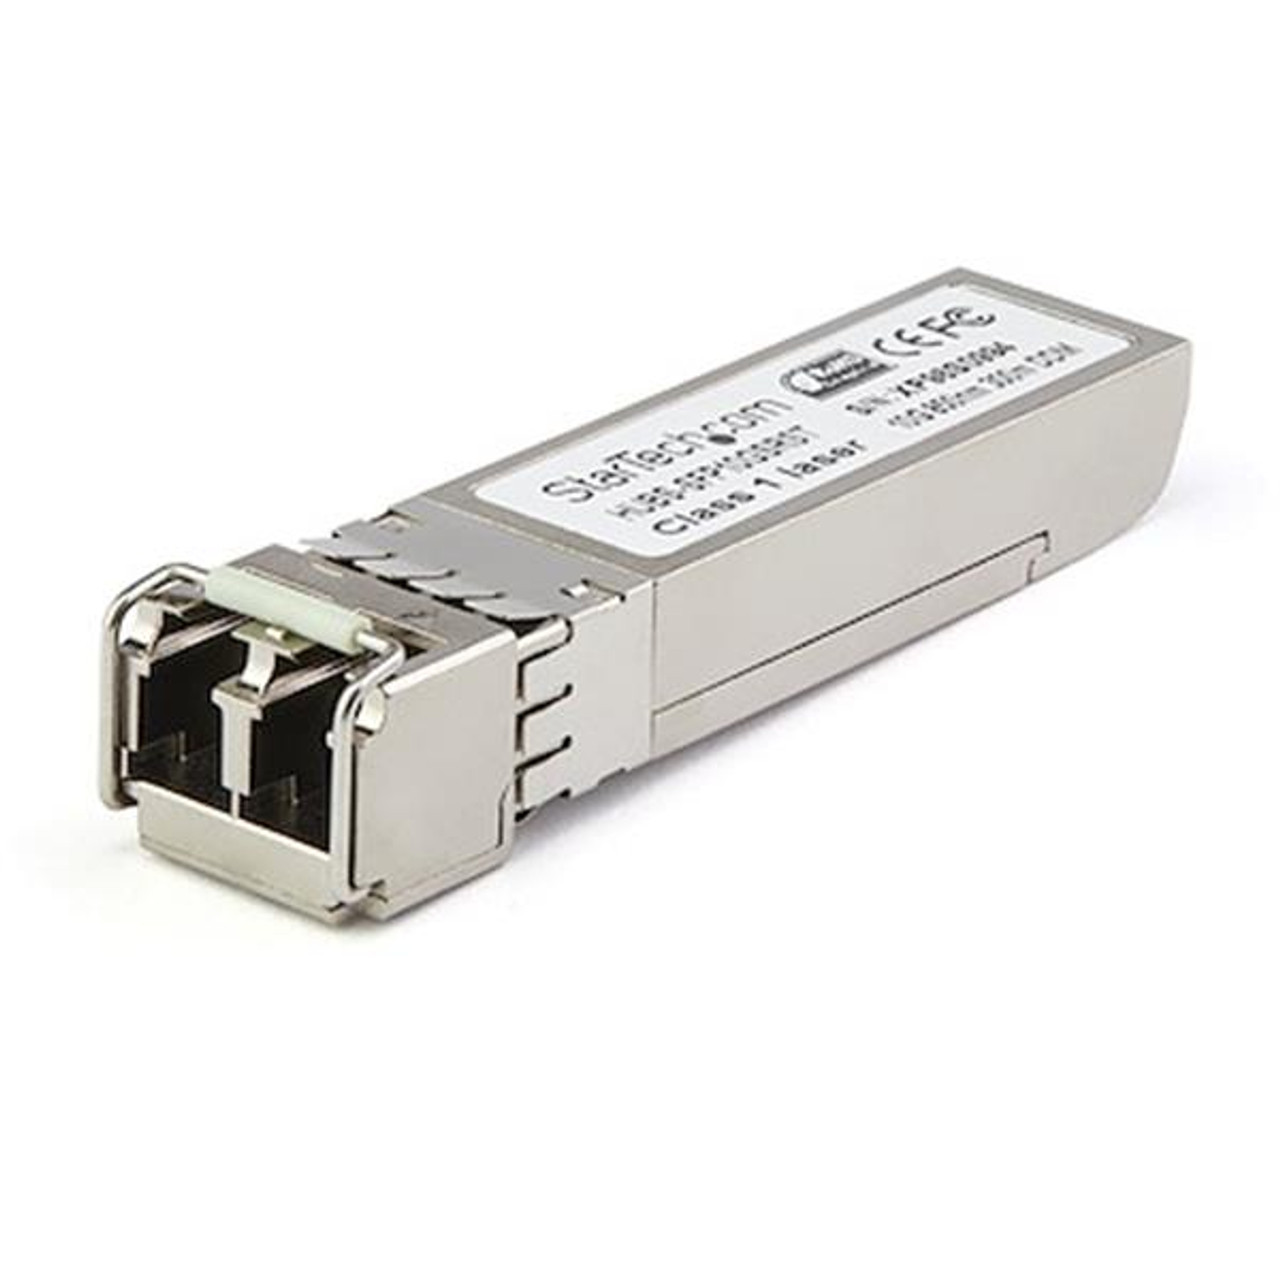 SFP10GZREMST StarTech 10Gbps 10GBase-ZR Single-mode Fiber 80km 1550nm LC Connector SFP+ Transceiver Module for MSA Compliant Compatible